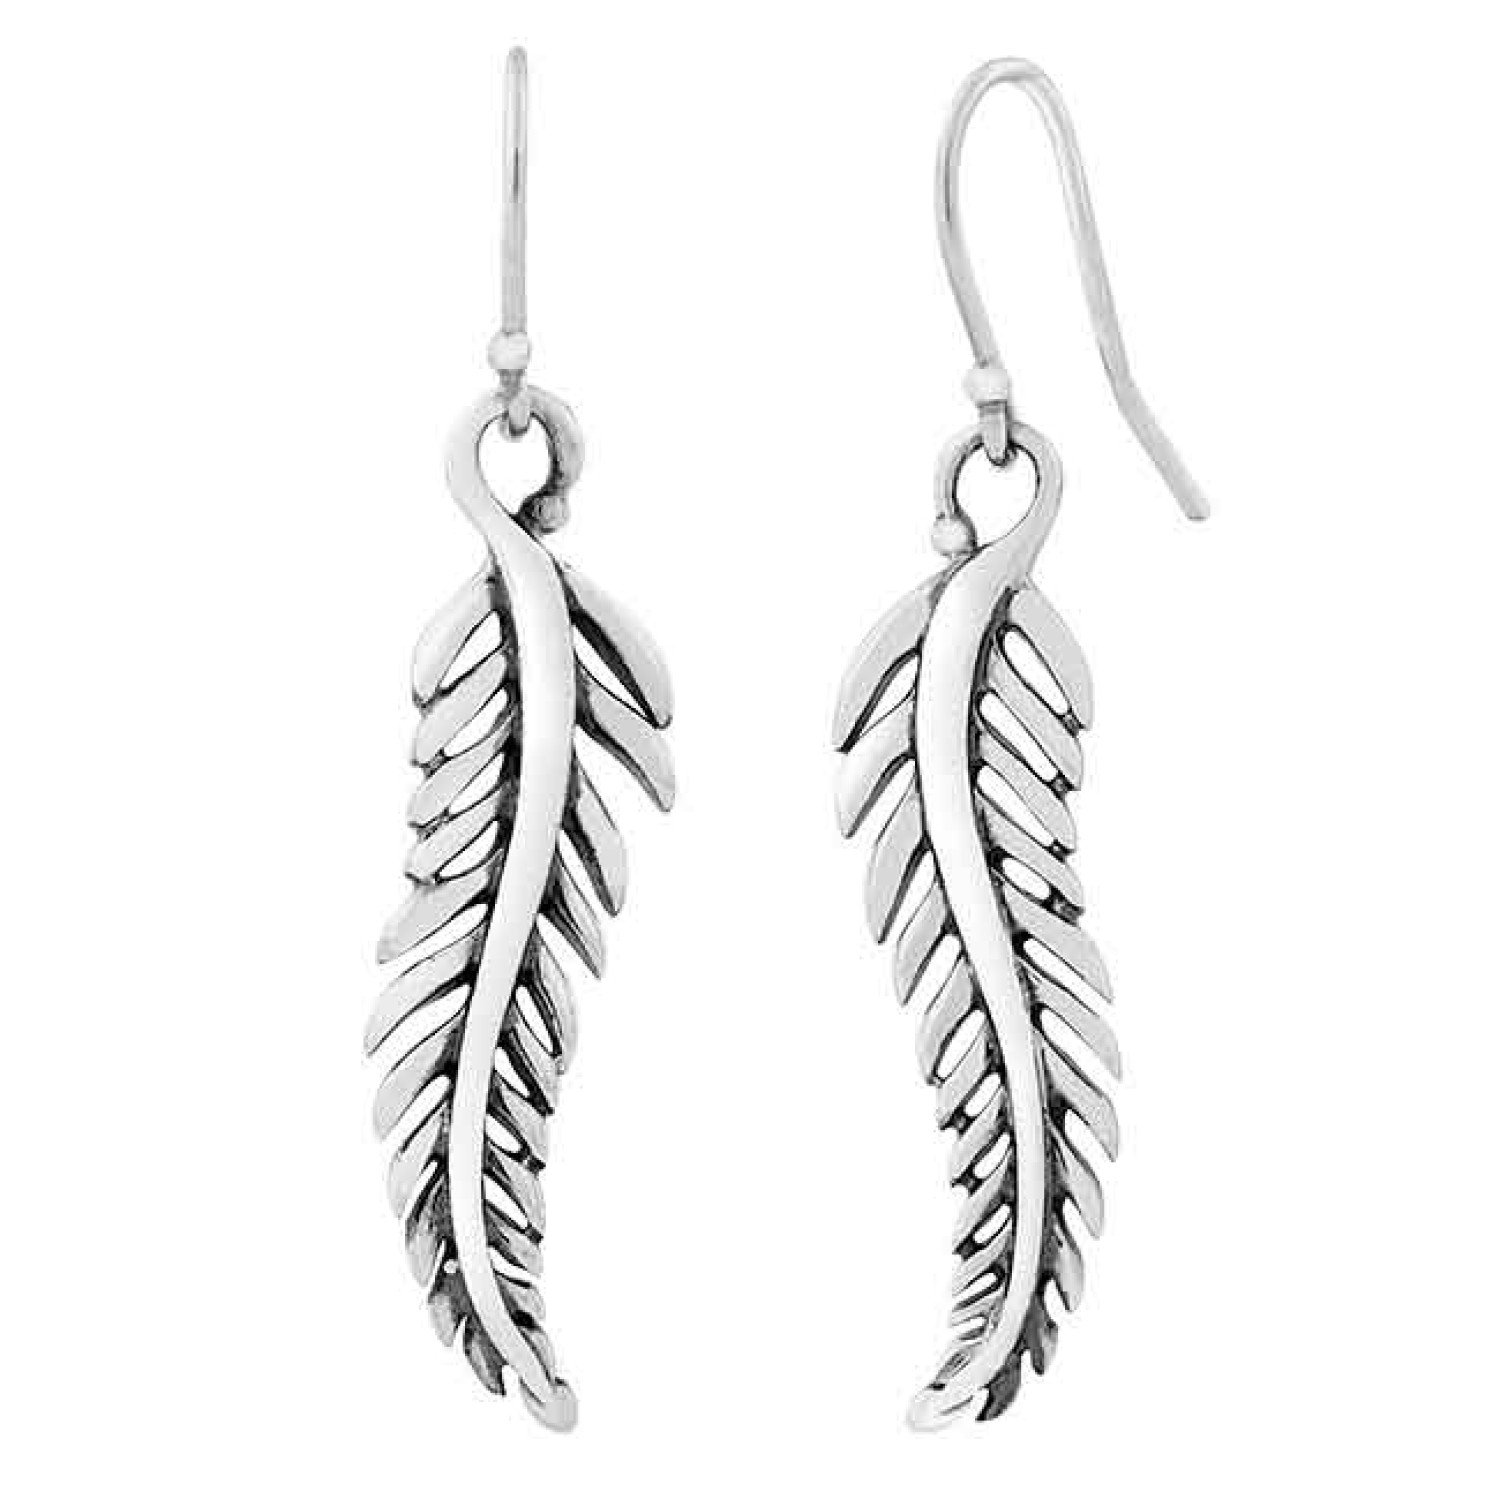 Evolve Silver Fern Earrings. The silver fern is widely used as a symbol by New Zealand national sports teams in various stylised forms. Silver Ferns is the name of the national netball team, and most other national womens sports teams have n @christies.on